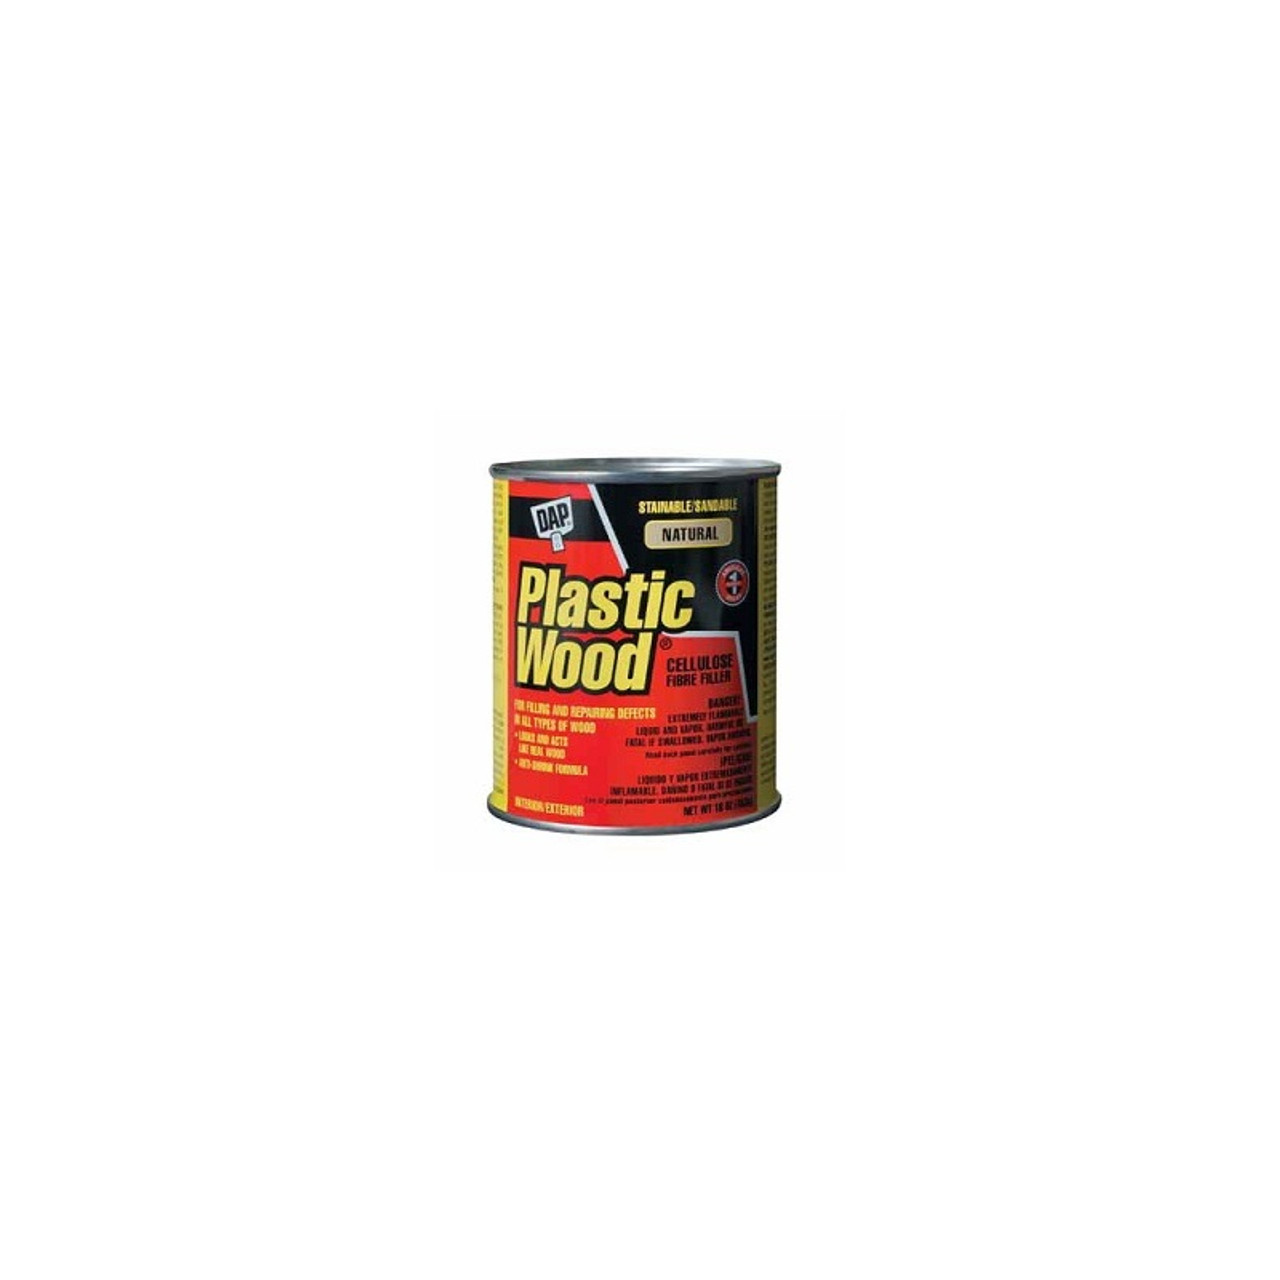 Wood Filler 16 oz Natural Brand Plastic Wood - No. 21506 - Whitehead  Industrial Hardware